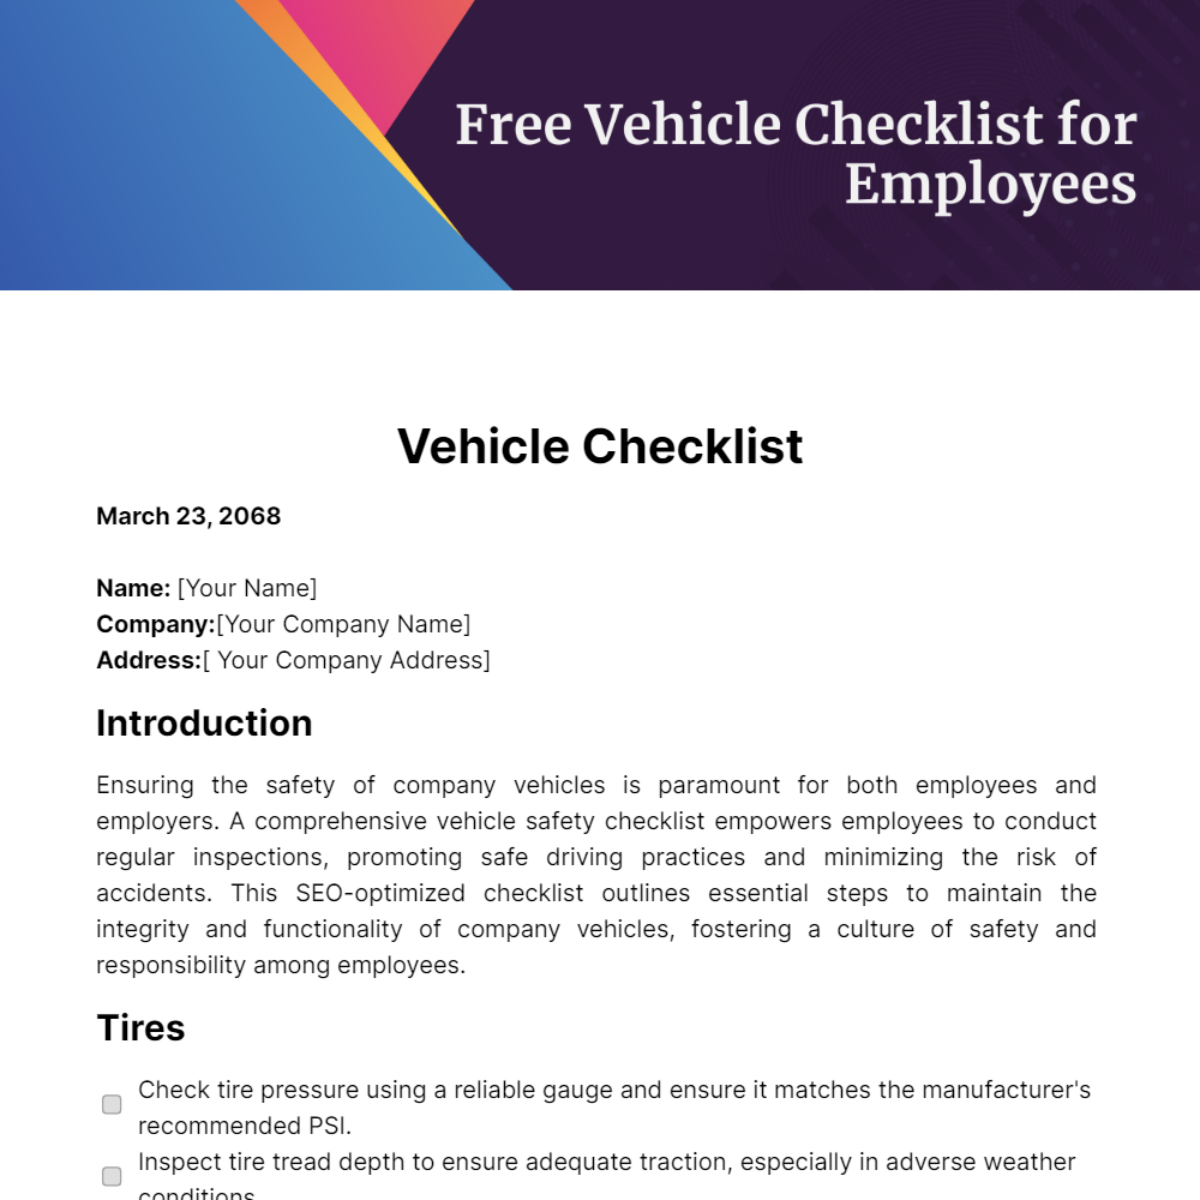 Vehicle Checklist for Employees Template